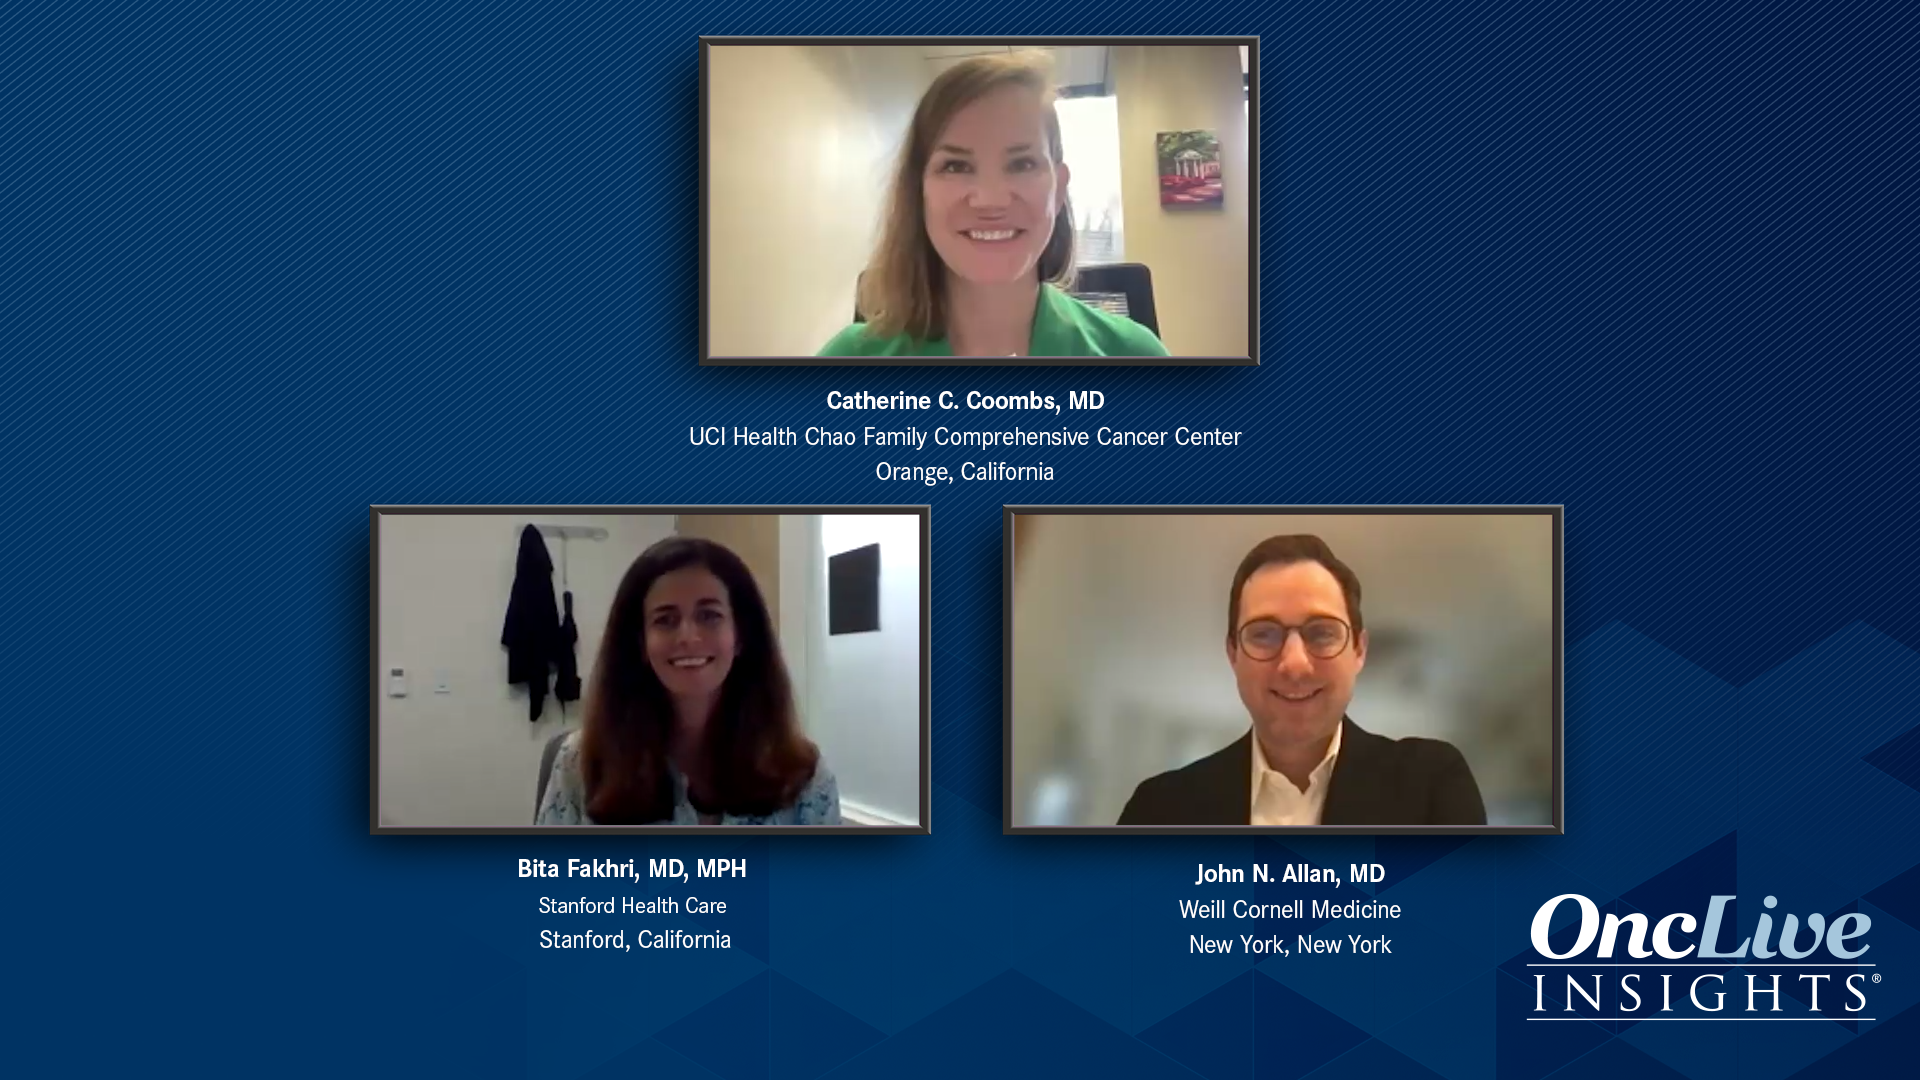 A panel of 3 experts on CLL